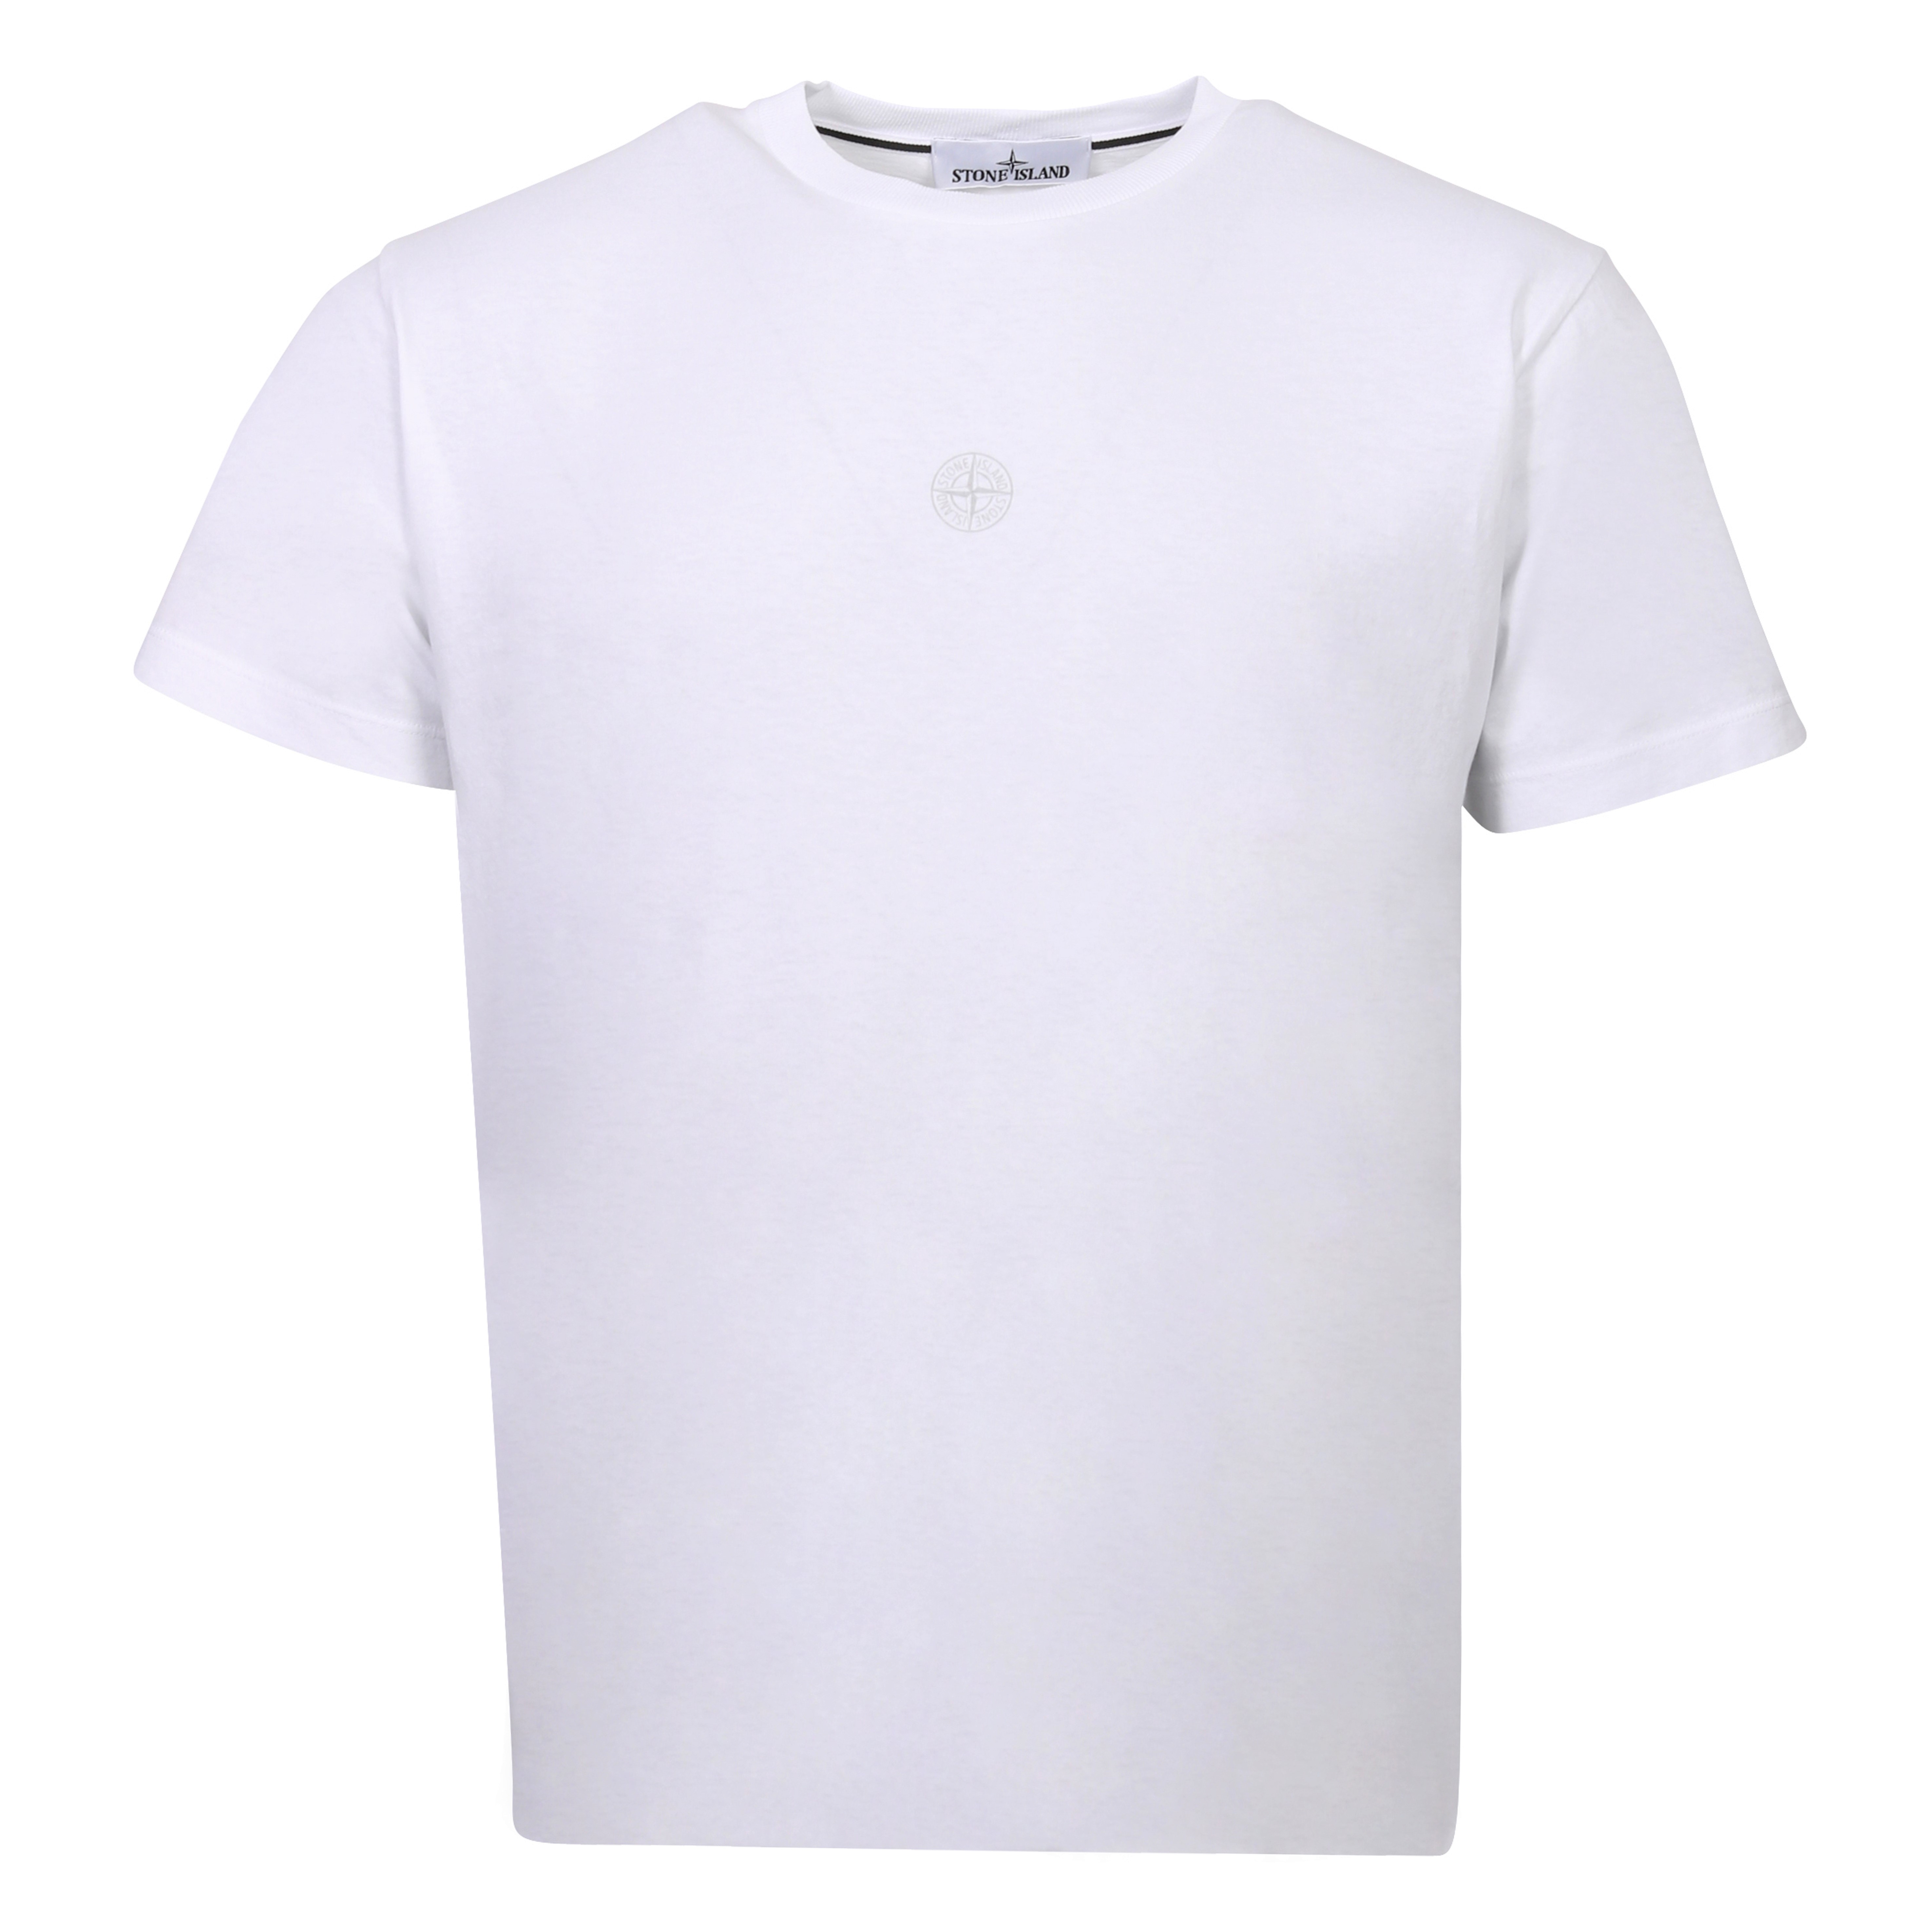 Stone Island Backprinted T-Shirt in White M